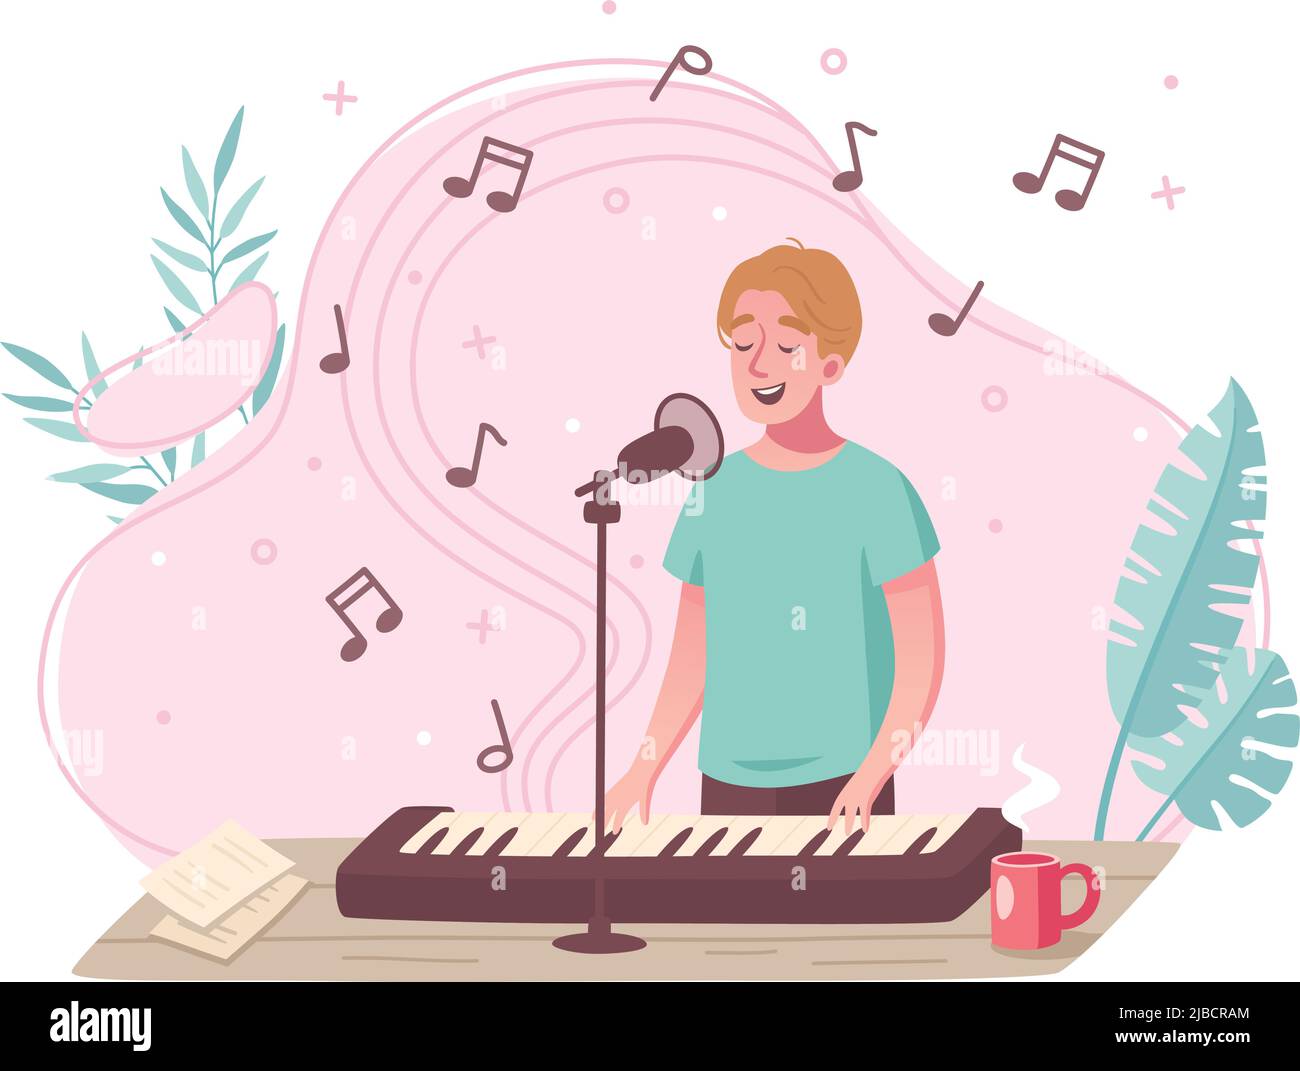 Hobby cartoon composition with young man singing while playing electronic piano organ keyboard with microphone vector illustration Stock Vector